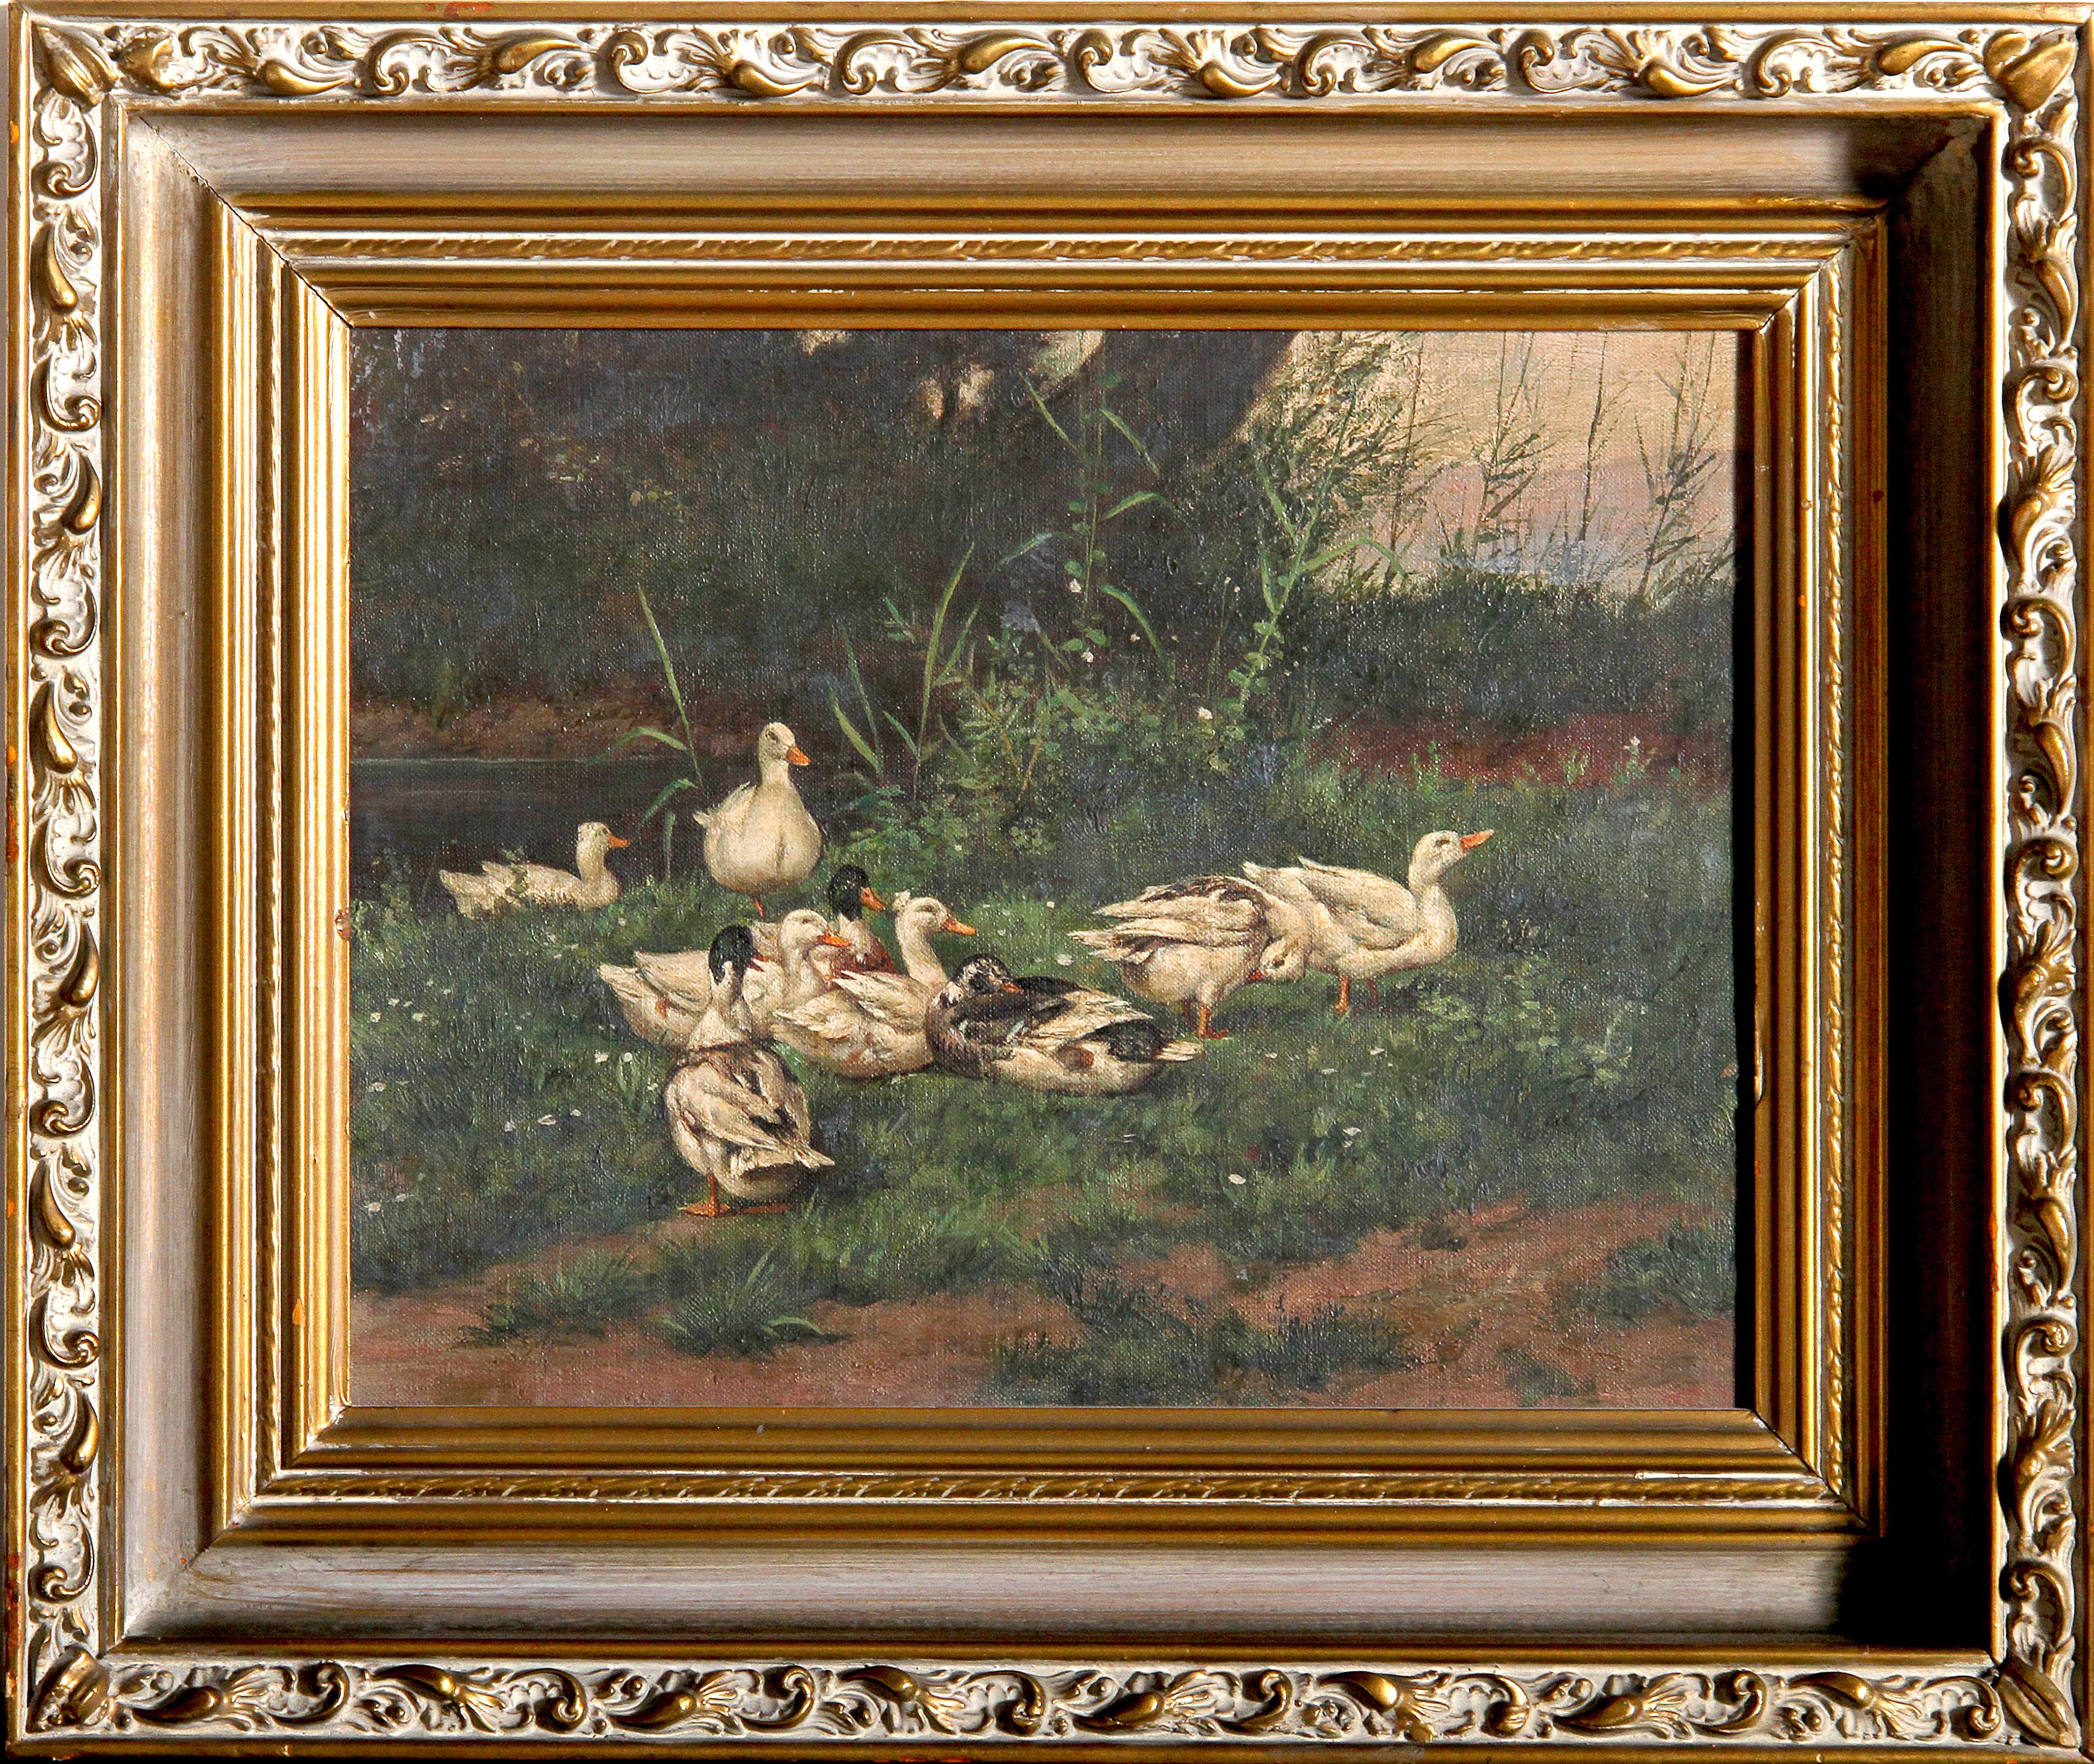 Unknown Figurative Painting - Family of Ducks, Oil Painting